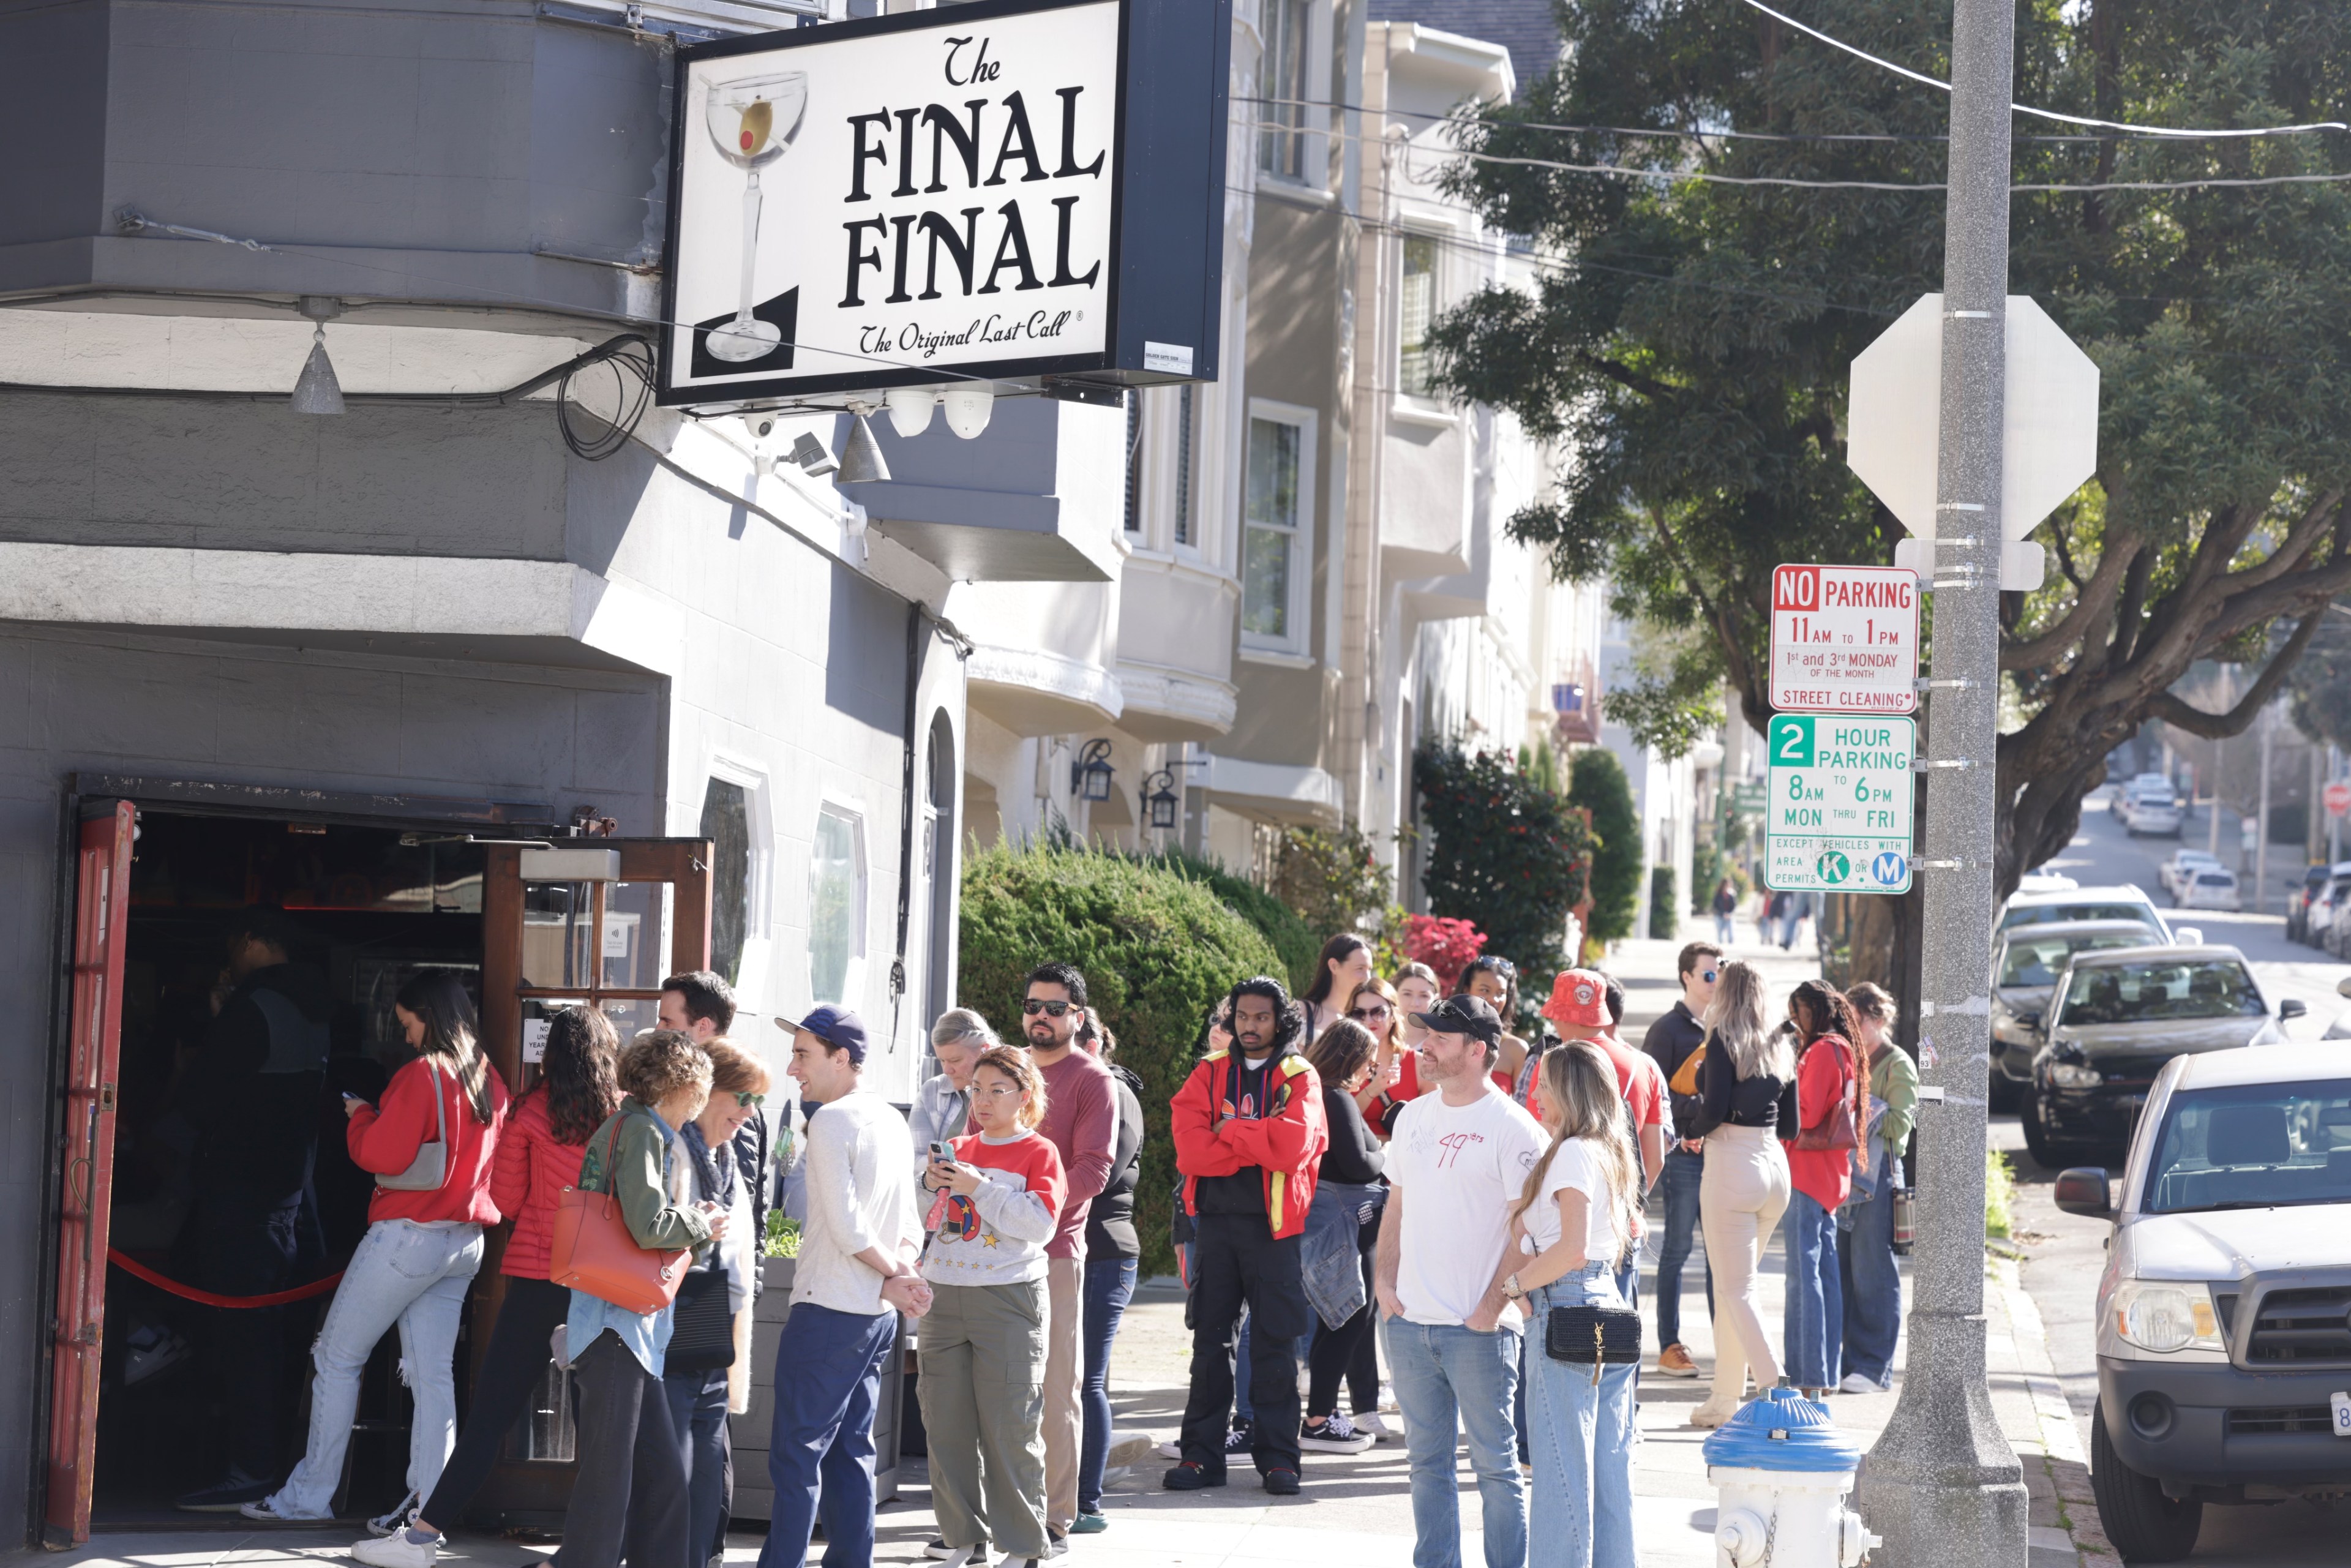 A bustling line of people waits outside &quot;The Final Final&quot; bar on a sunny street corner.